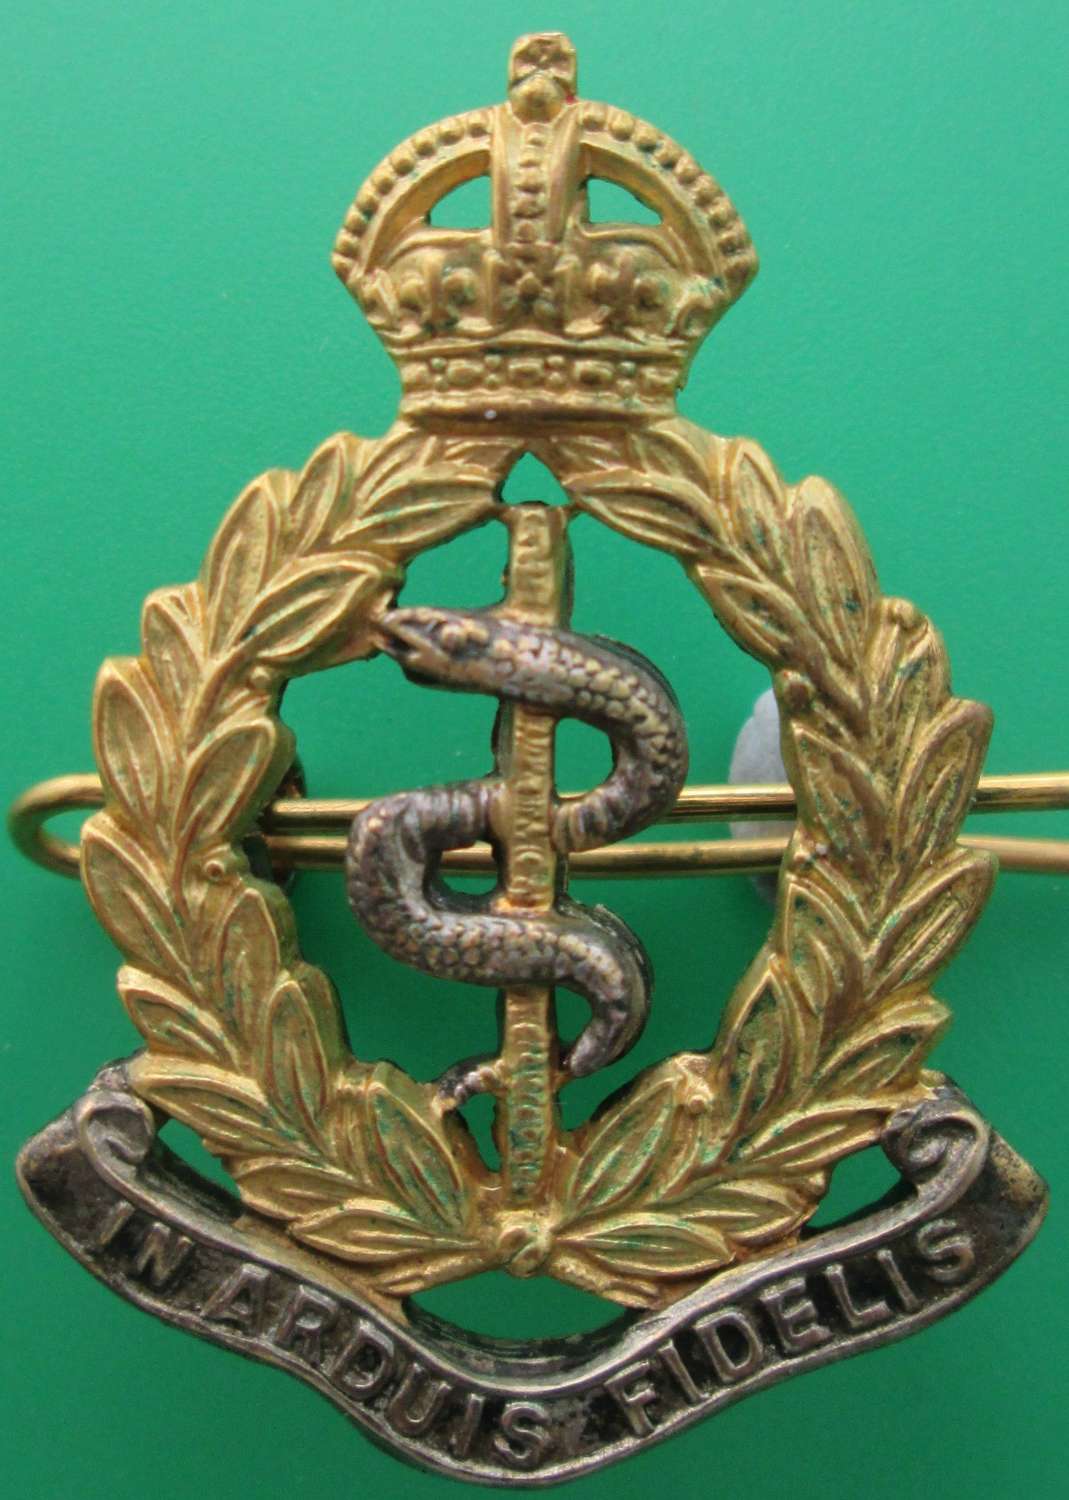 A SILVER AND GILT OFFICER'S RAMC CAP BADGE